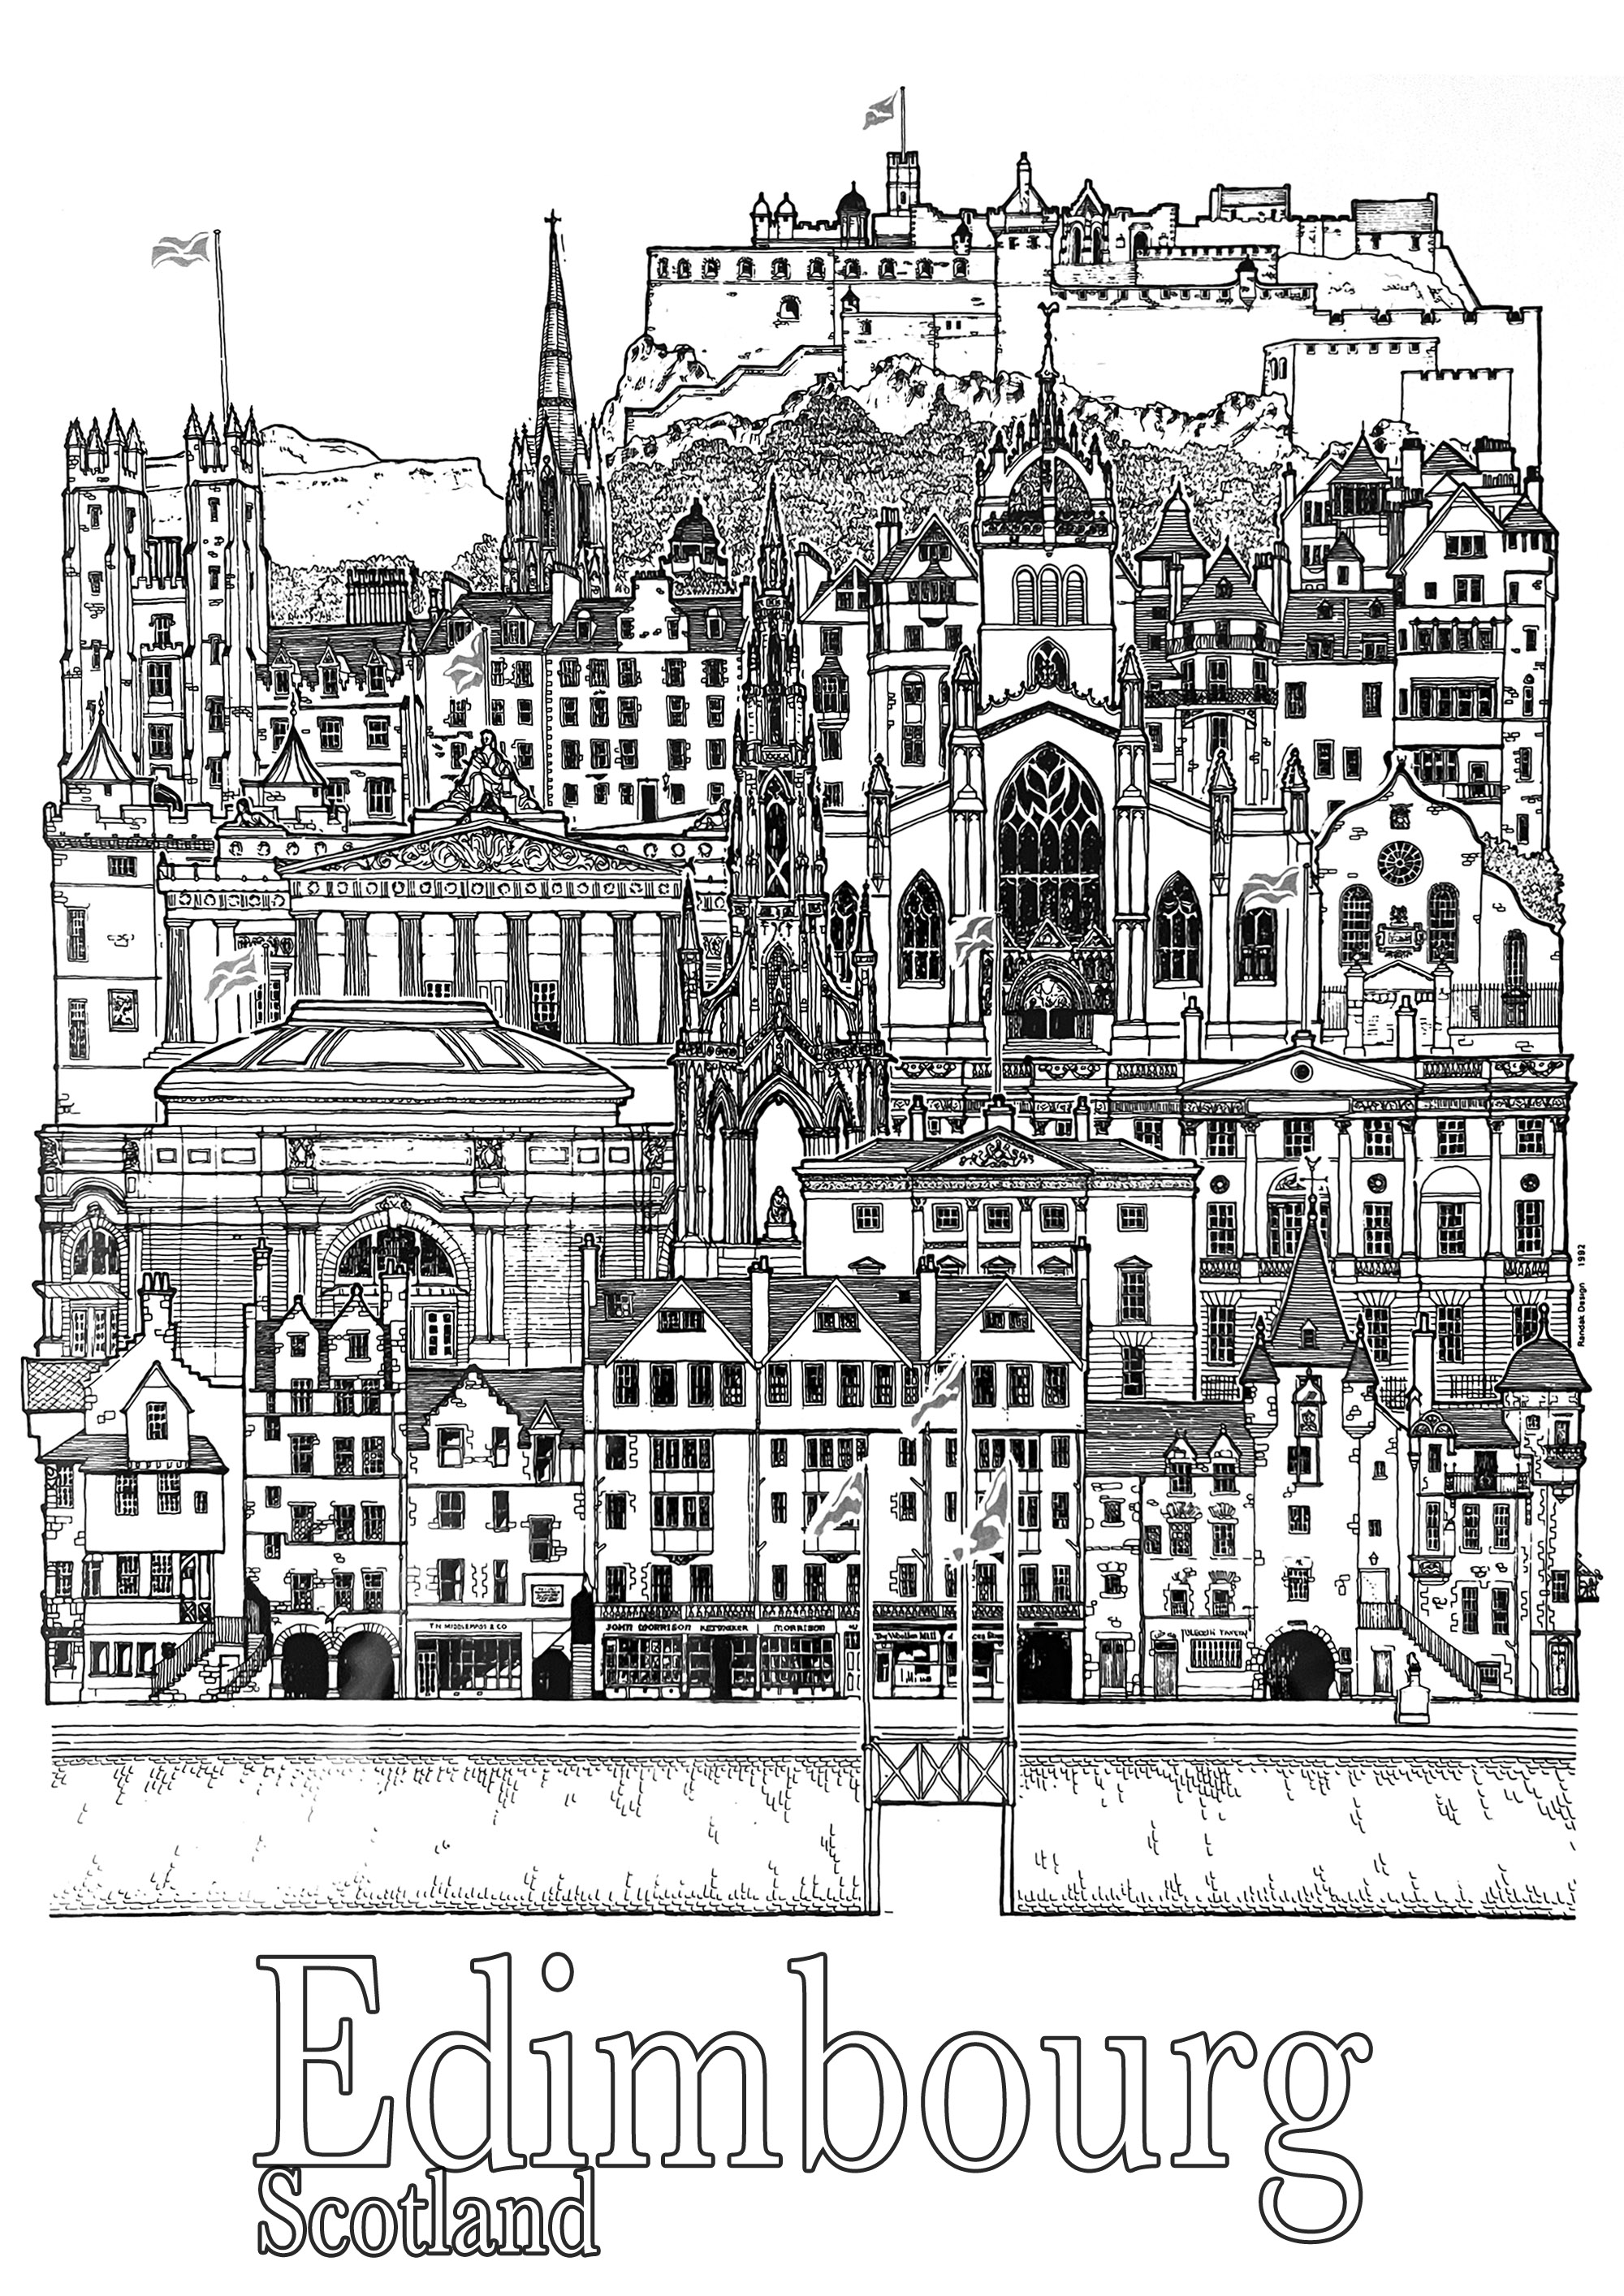 The city of Edinburgh, Scotland (United Kingdom). This coloring page features the main monuments and landmarks of Edinburgh, Scotland (UK): Edinburgh Castle, Palace of Holyrood, Arthur's Seat, St. Giles Cathedral, Royal Mile, The Scott Monument, Calton Hill, National Monument, Nelson Monument, Greyfriars Kirkyard, National Museum of Scotland, Scottish Parliament.